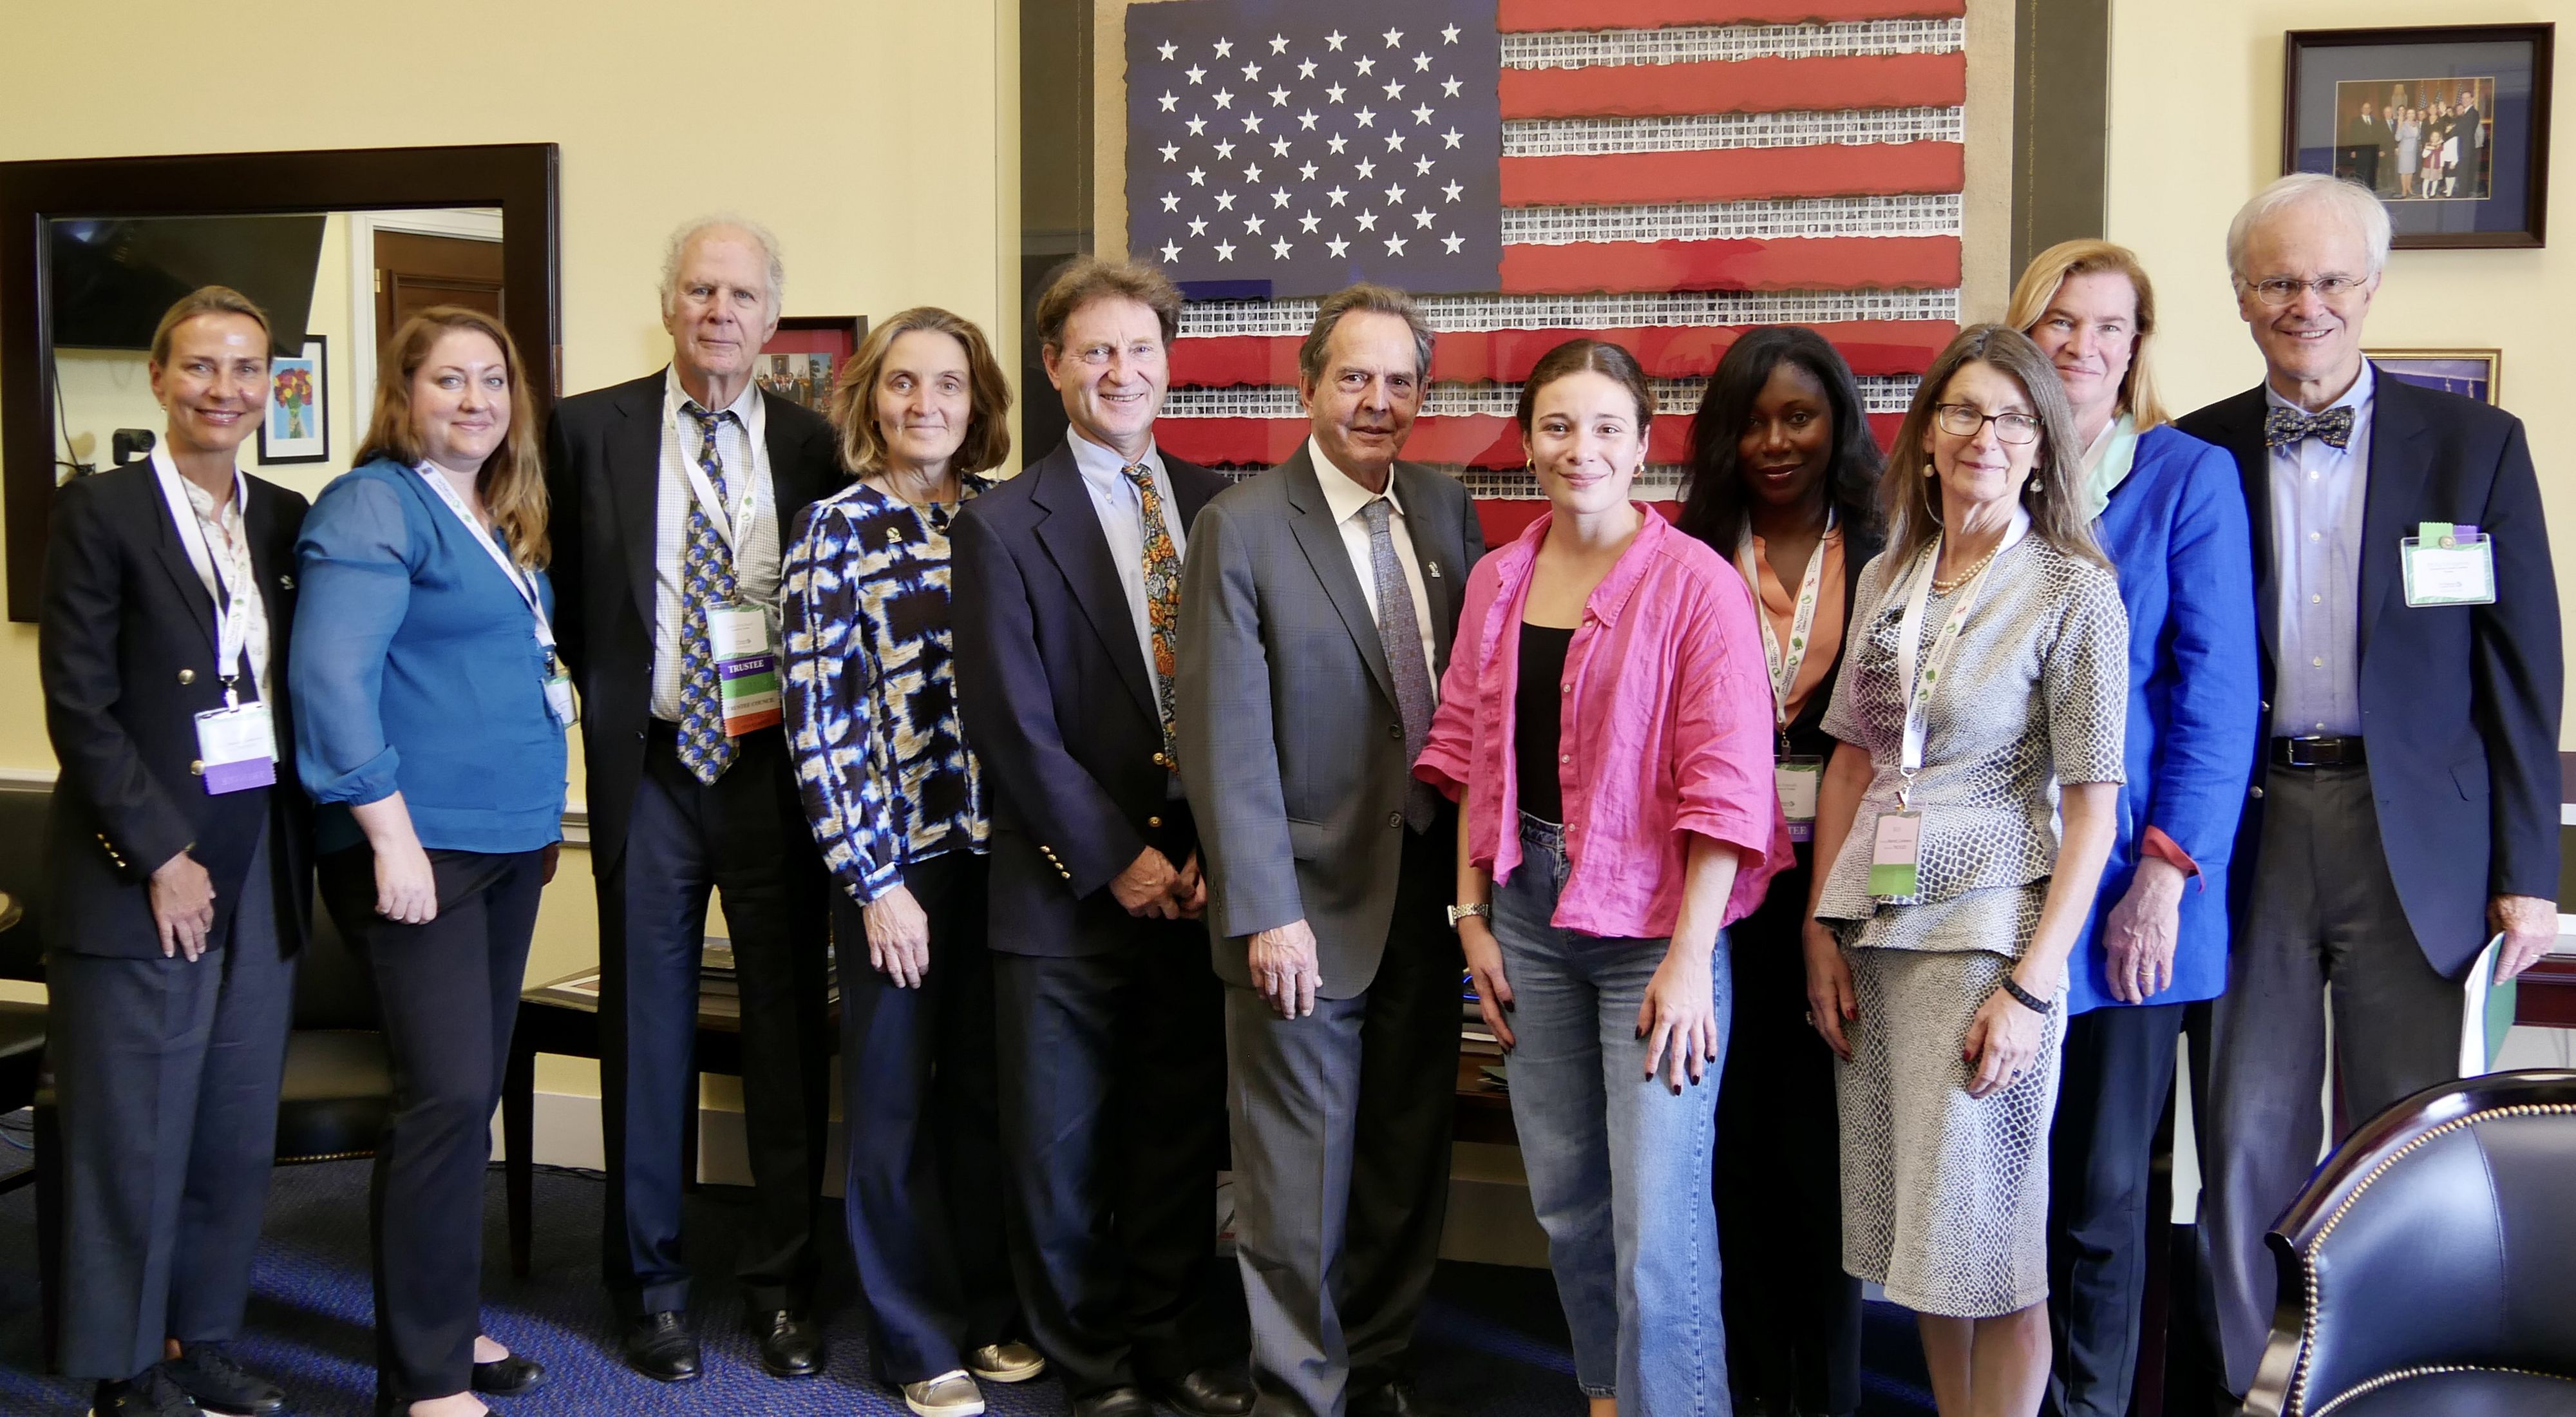 TNC in CT Staff and trustees, standing in an office in DC.